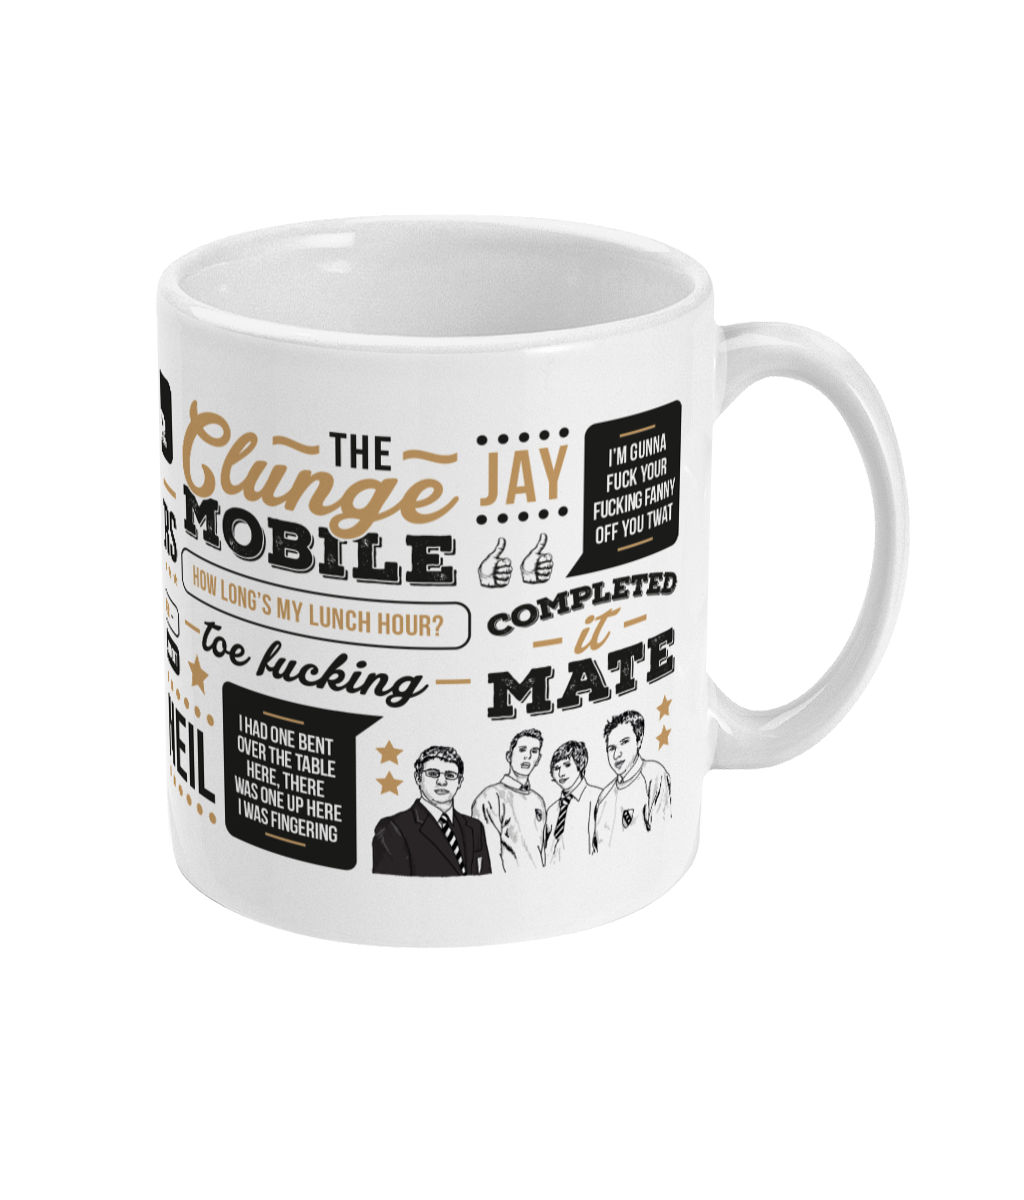 hilarious the inbetweeners themed coffee cup mug with the funniest quotes and one liners from main characters jay, will, simon & neil. Classics such as bus wankers, clunge mobile, completed it mate